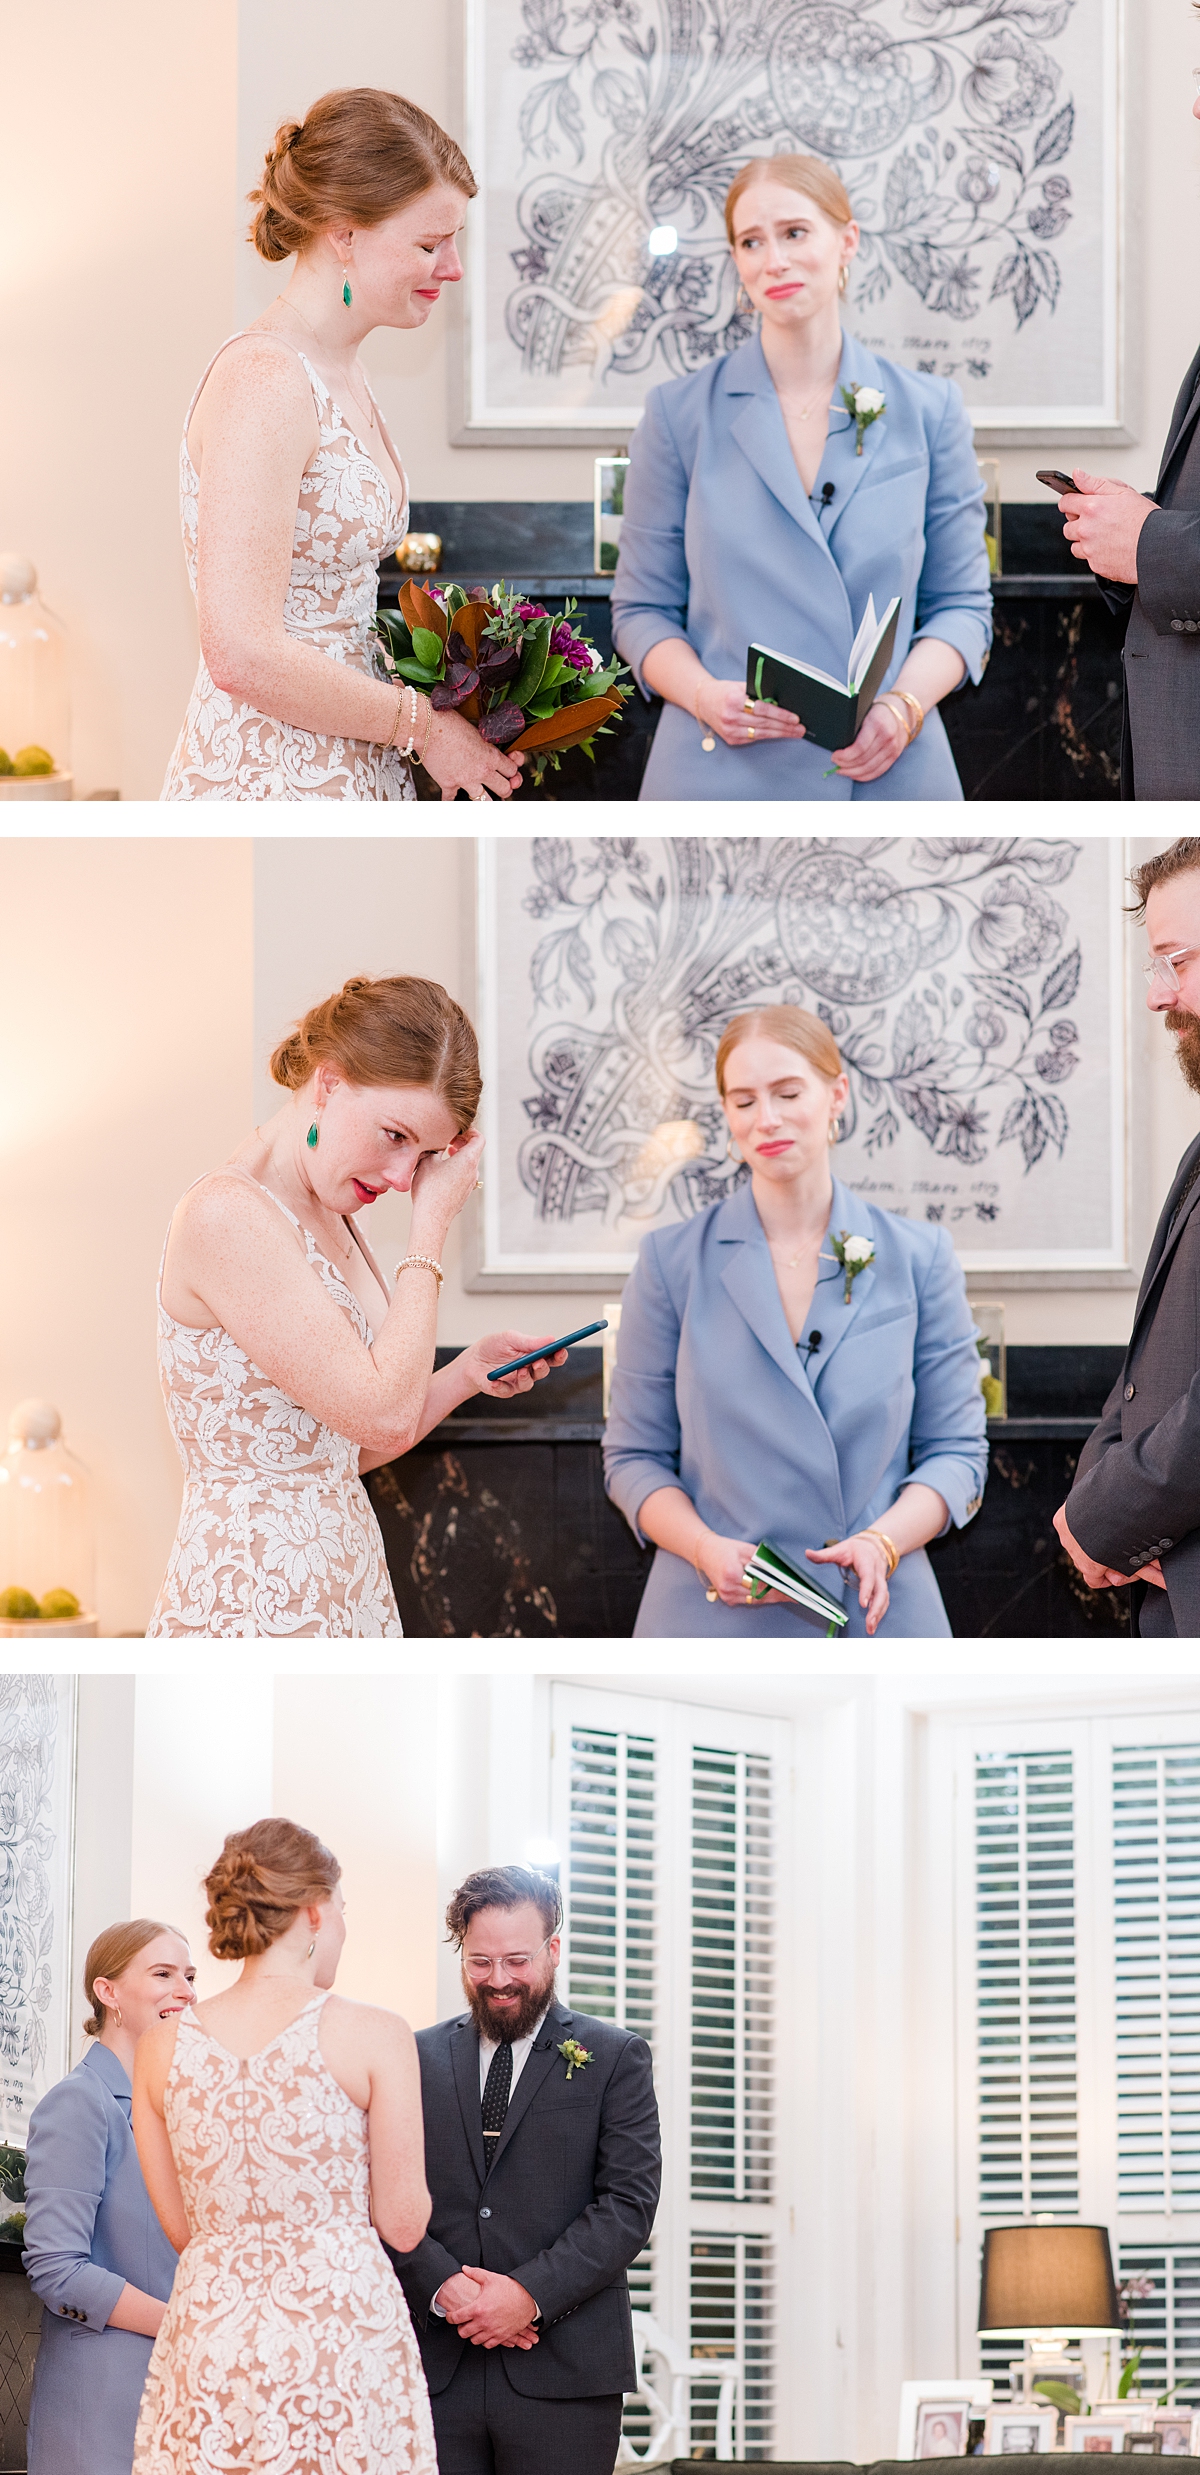 Exchanging Vows at Intimate Richmond Elopement Ceremony. Wedding Photography by Richmond Wedding Photographer Kailey Brianne Photography. 